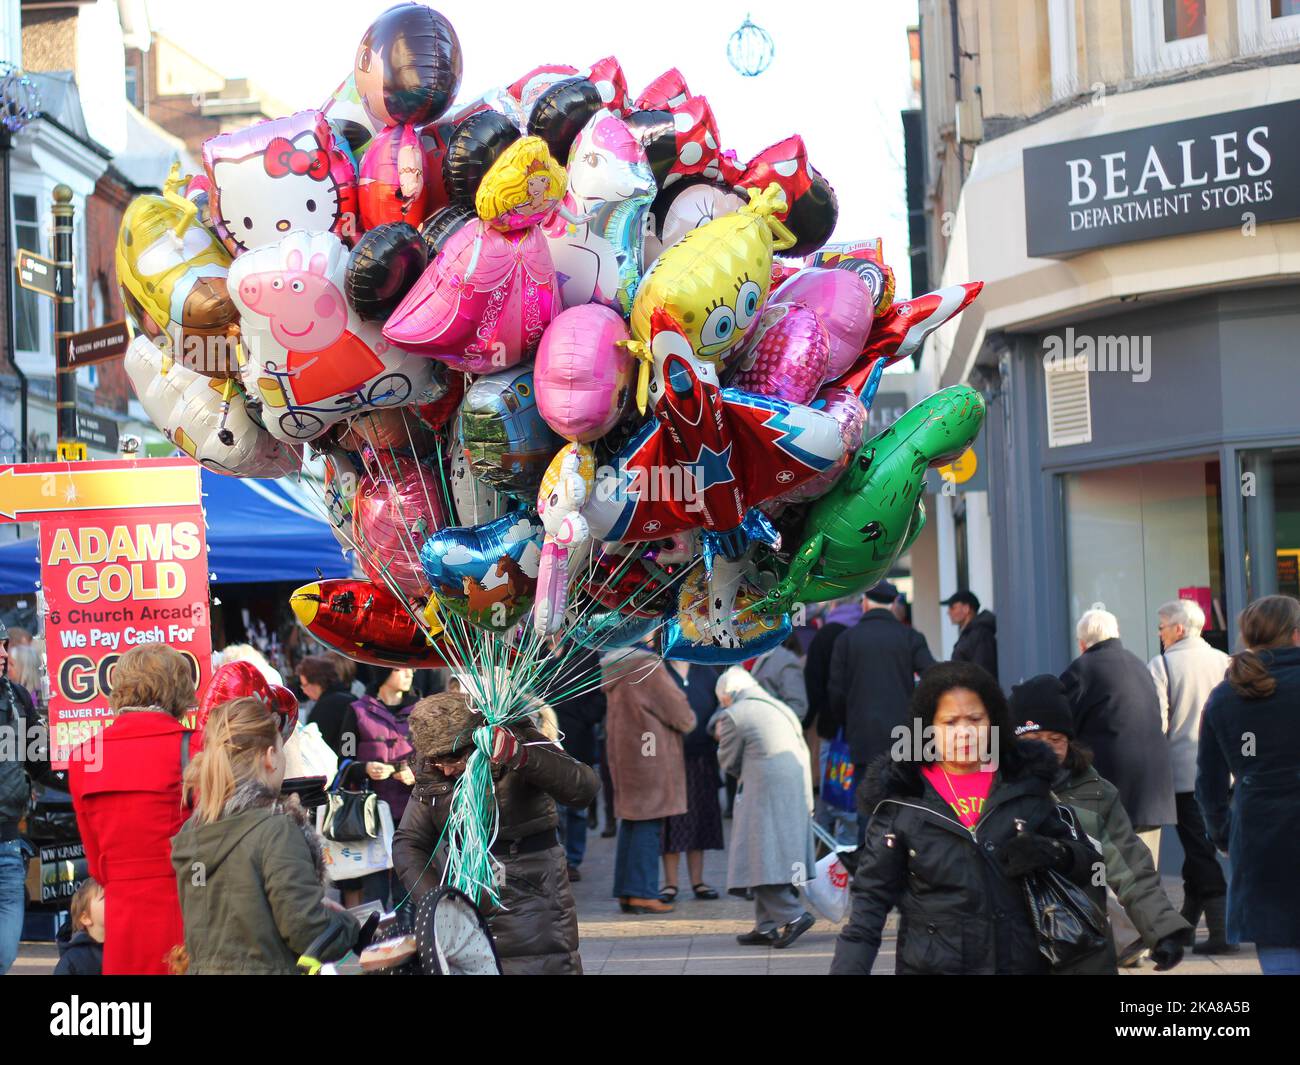 Balloon seller selling various balloons in Bedford town Centre, United Kingdom. Stock Photo